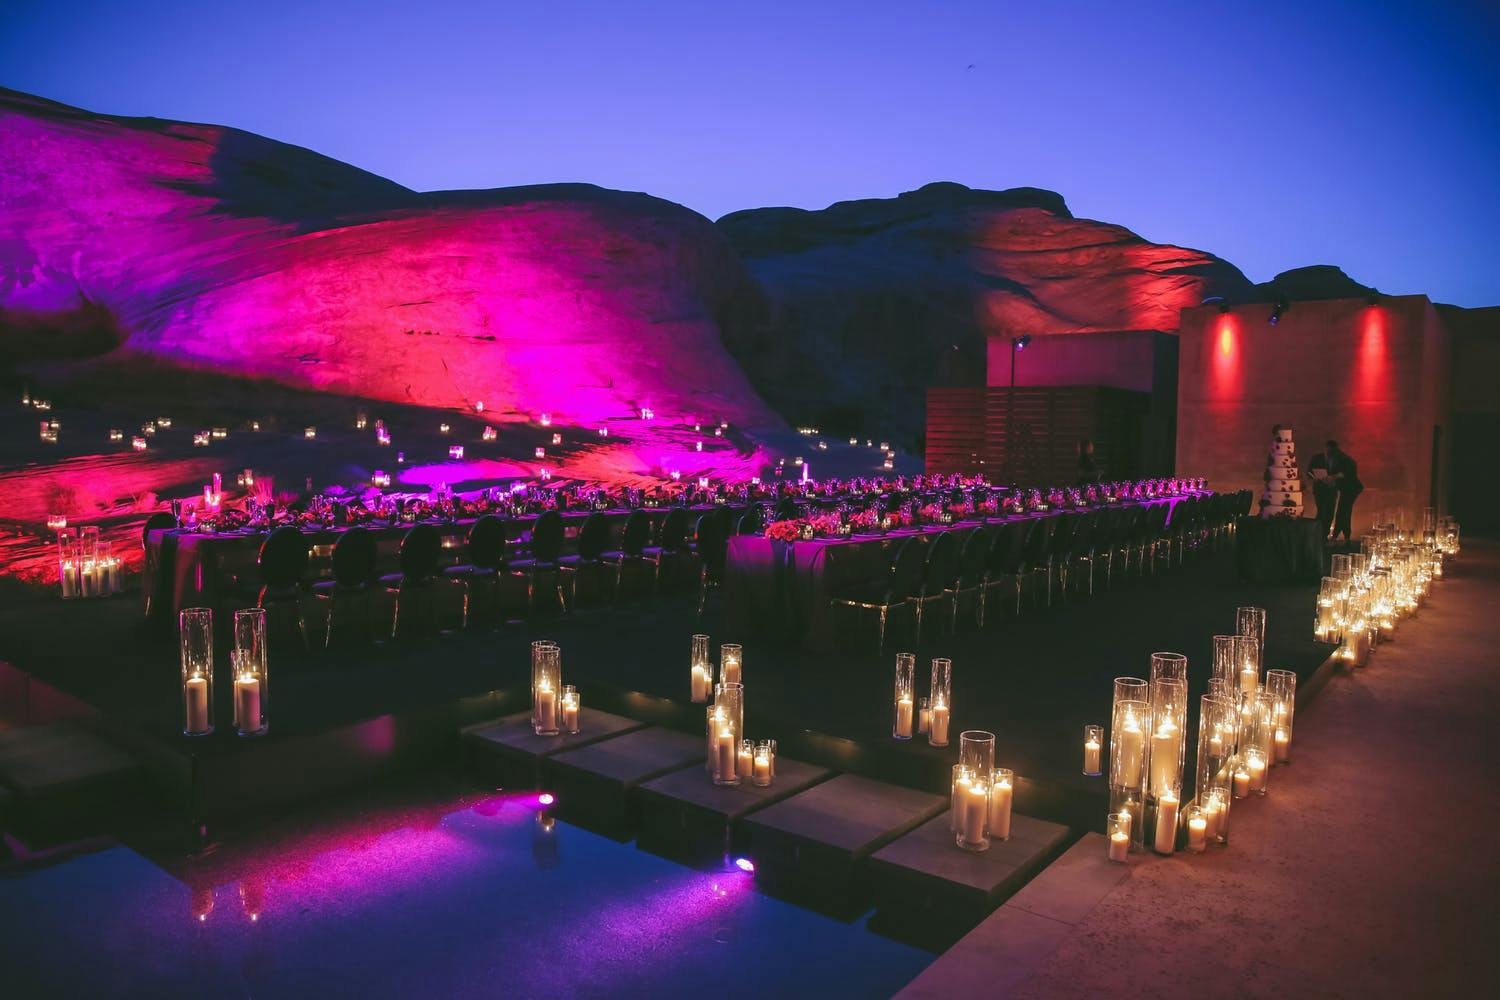 Wedding night reception in desert with candlelight and purple and red lighting projected onto surrounding canyons | PartySlate